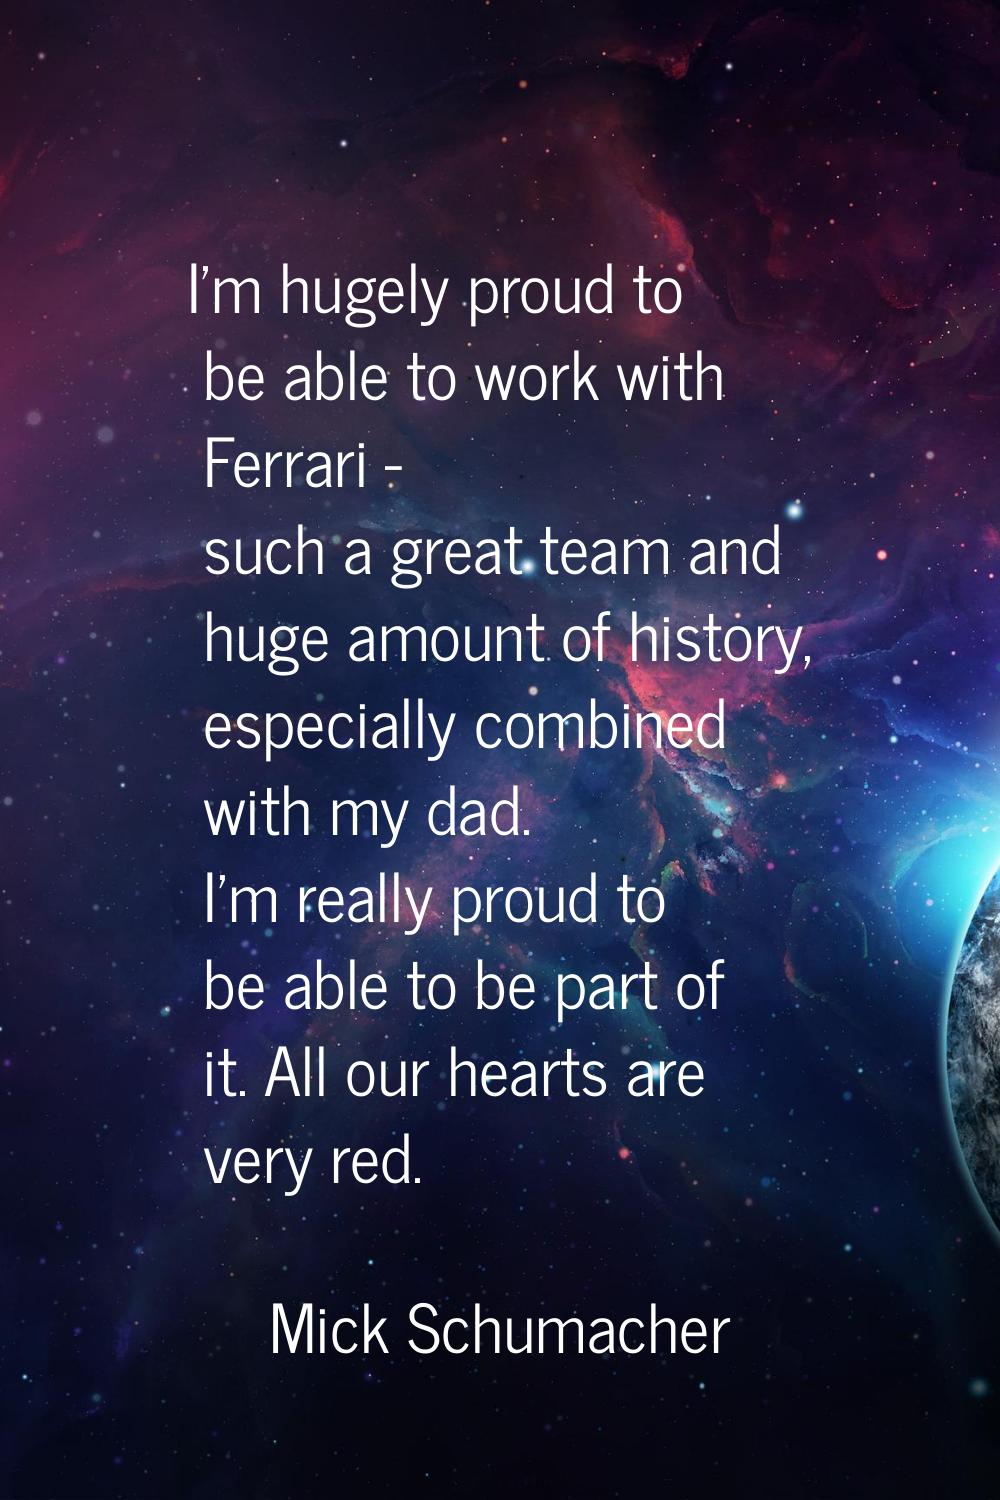 I'm hugely proud to be able to work with Ferrari - such a great team and huge amount of history, es